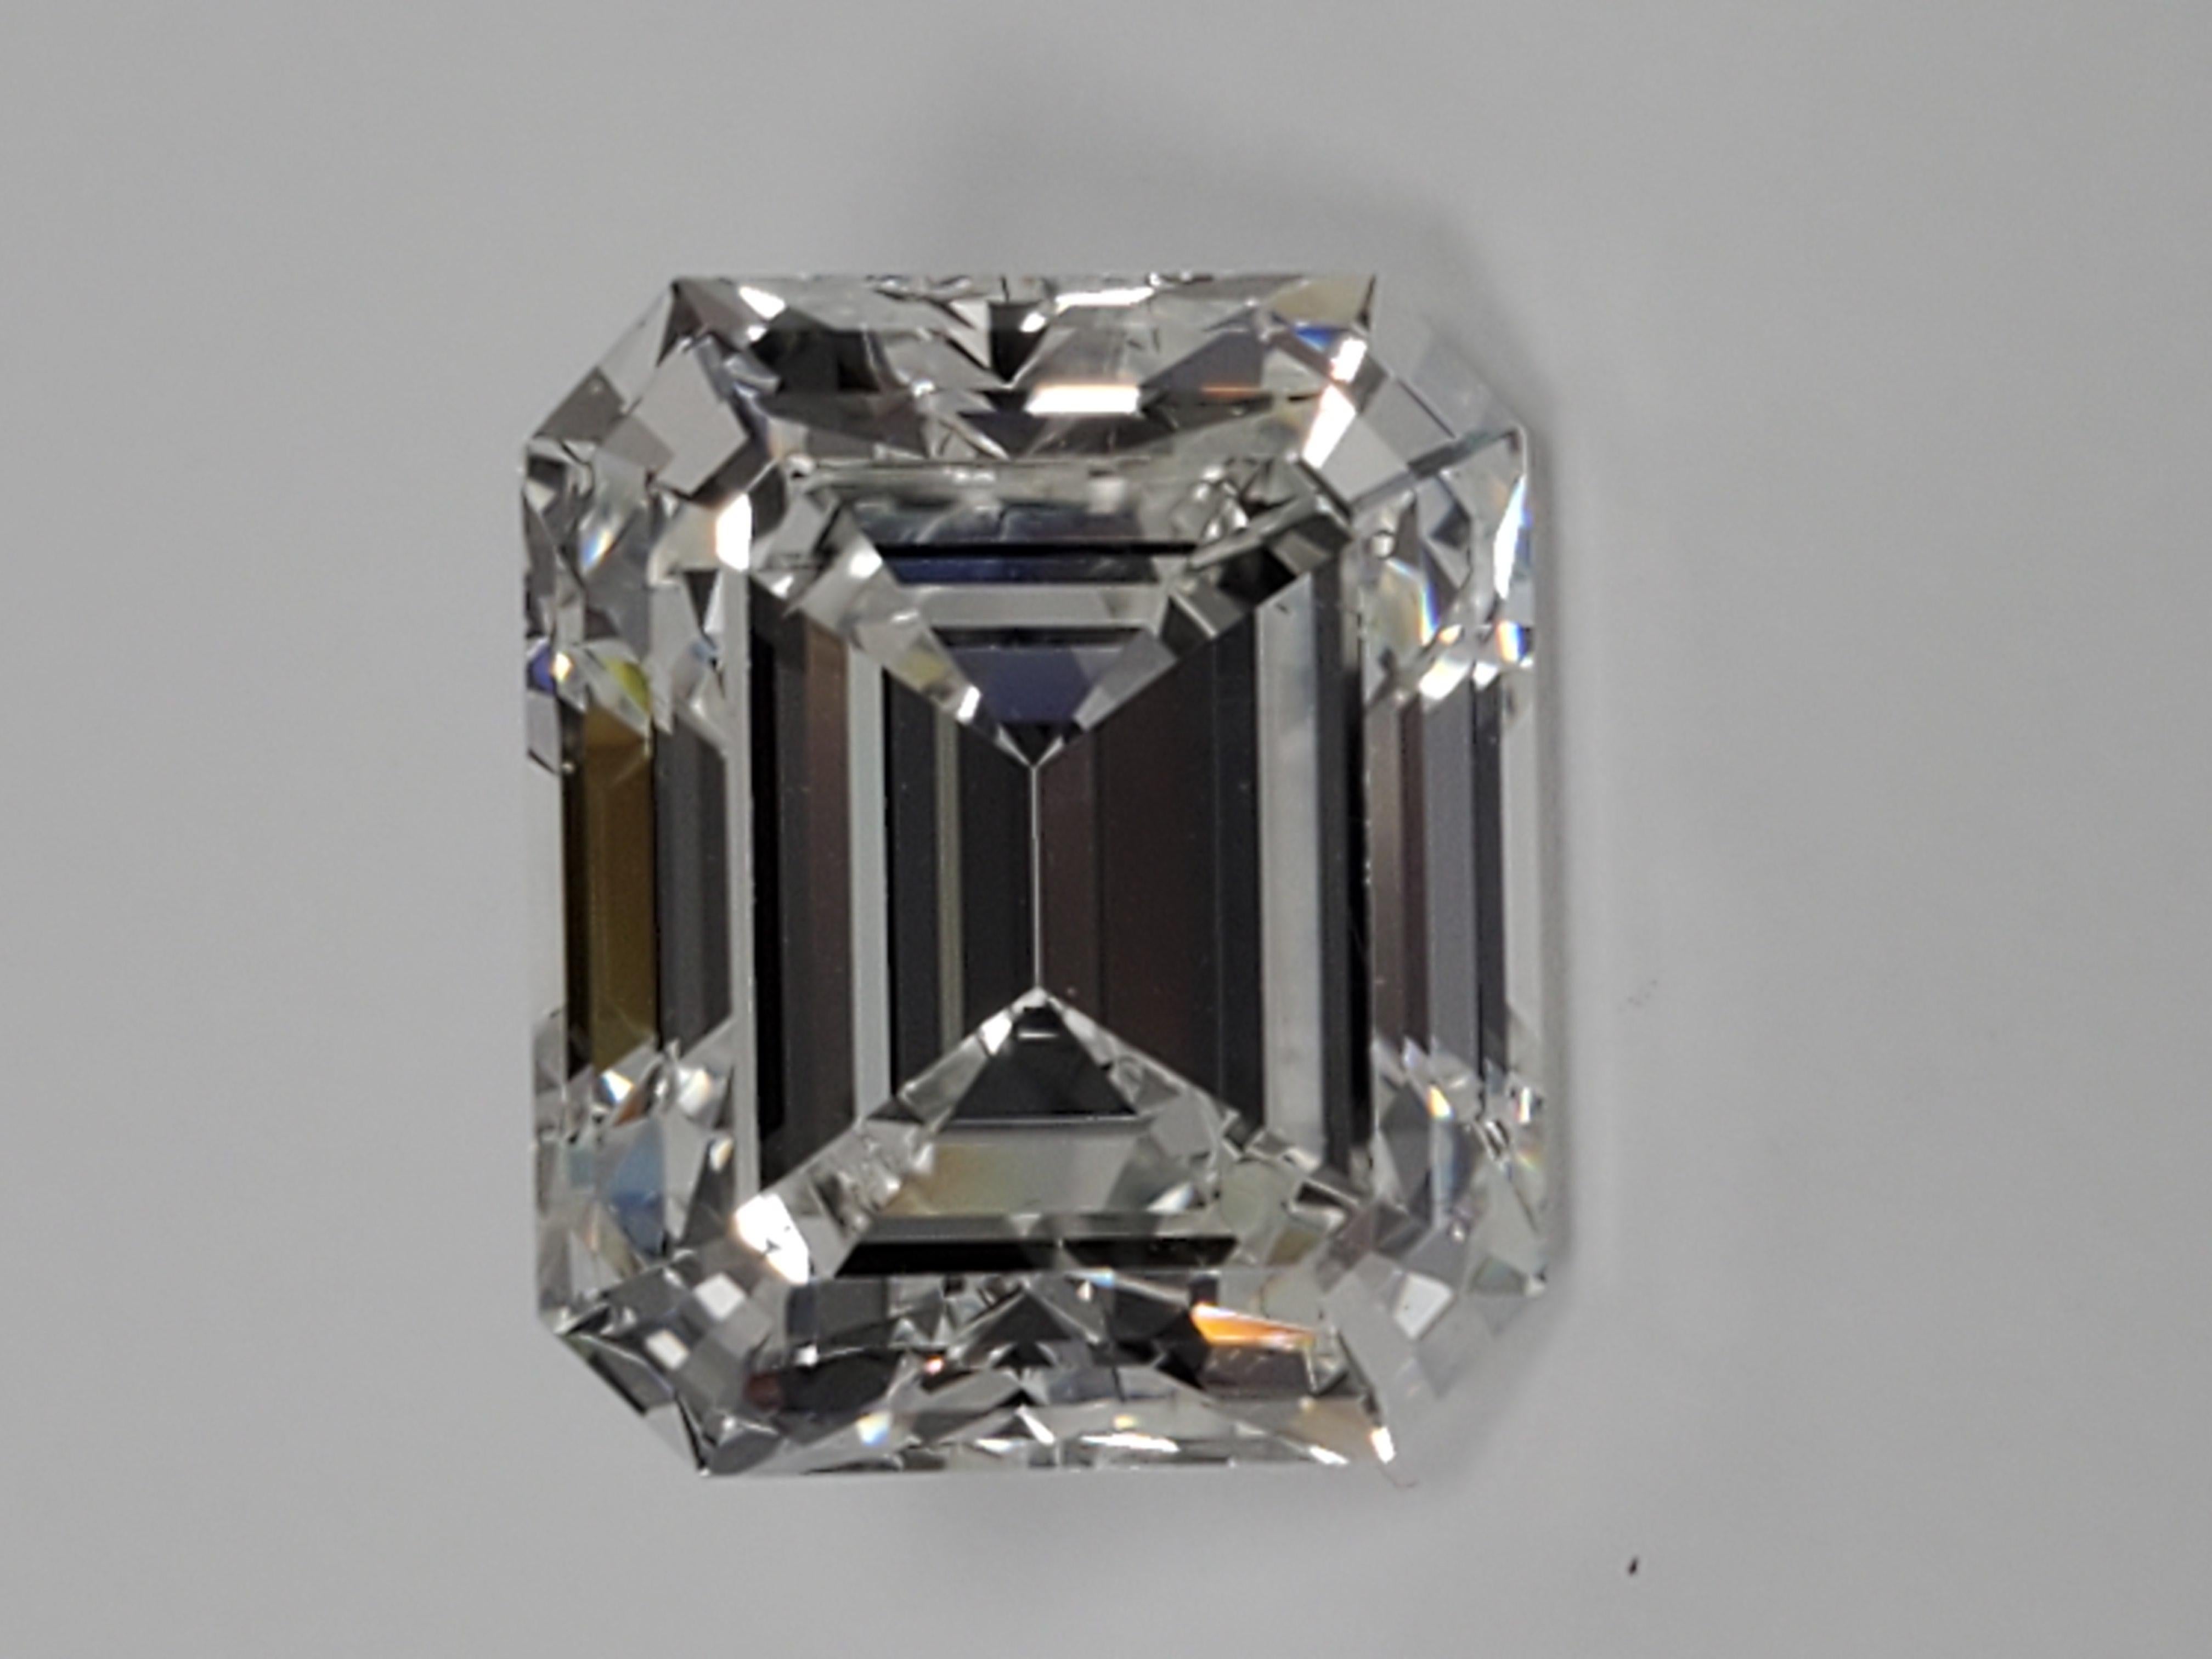 This GIA Certified 6.41 carat Emerald Cut Diamond was cut in our facility here at Louis Newman & Company. What makes this stone unique is that it is not long like most Emerald Cuts but this one is more on the wider side giving it a bigger look. Wear